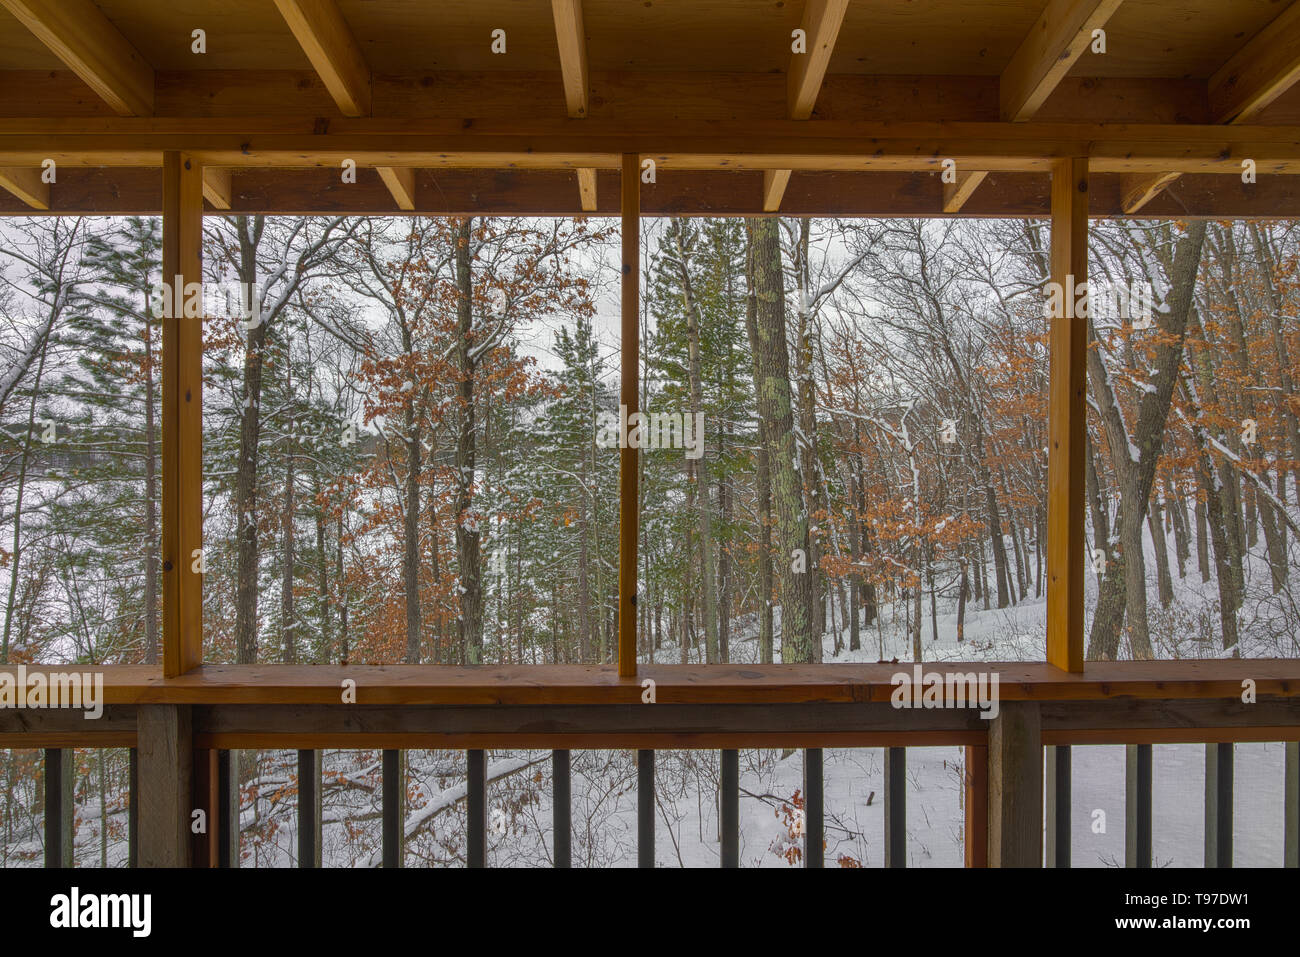 Beautiful snowy winter view of a Northwoods mixed forest (deciduous and coniferous) through a screened-in porch on a rustic cabin off a remote lake in Stock Photo